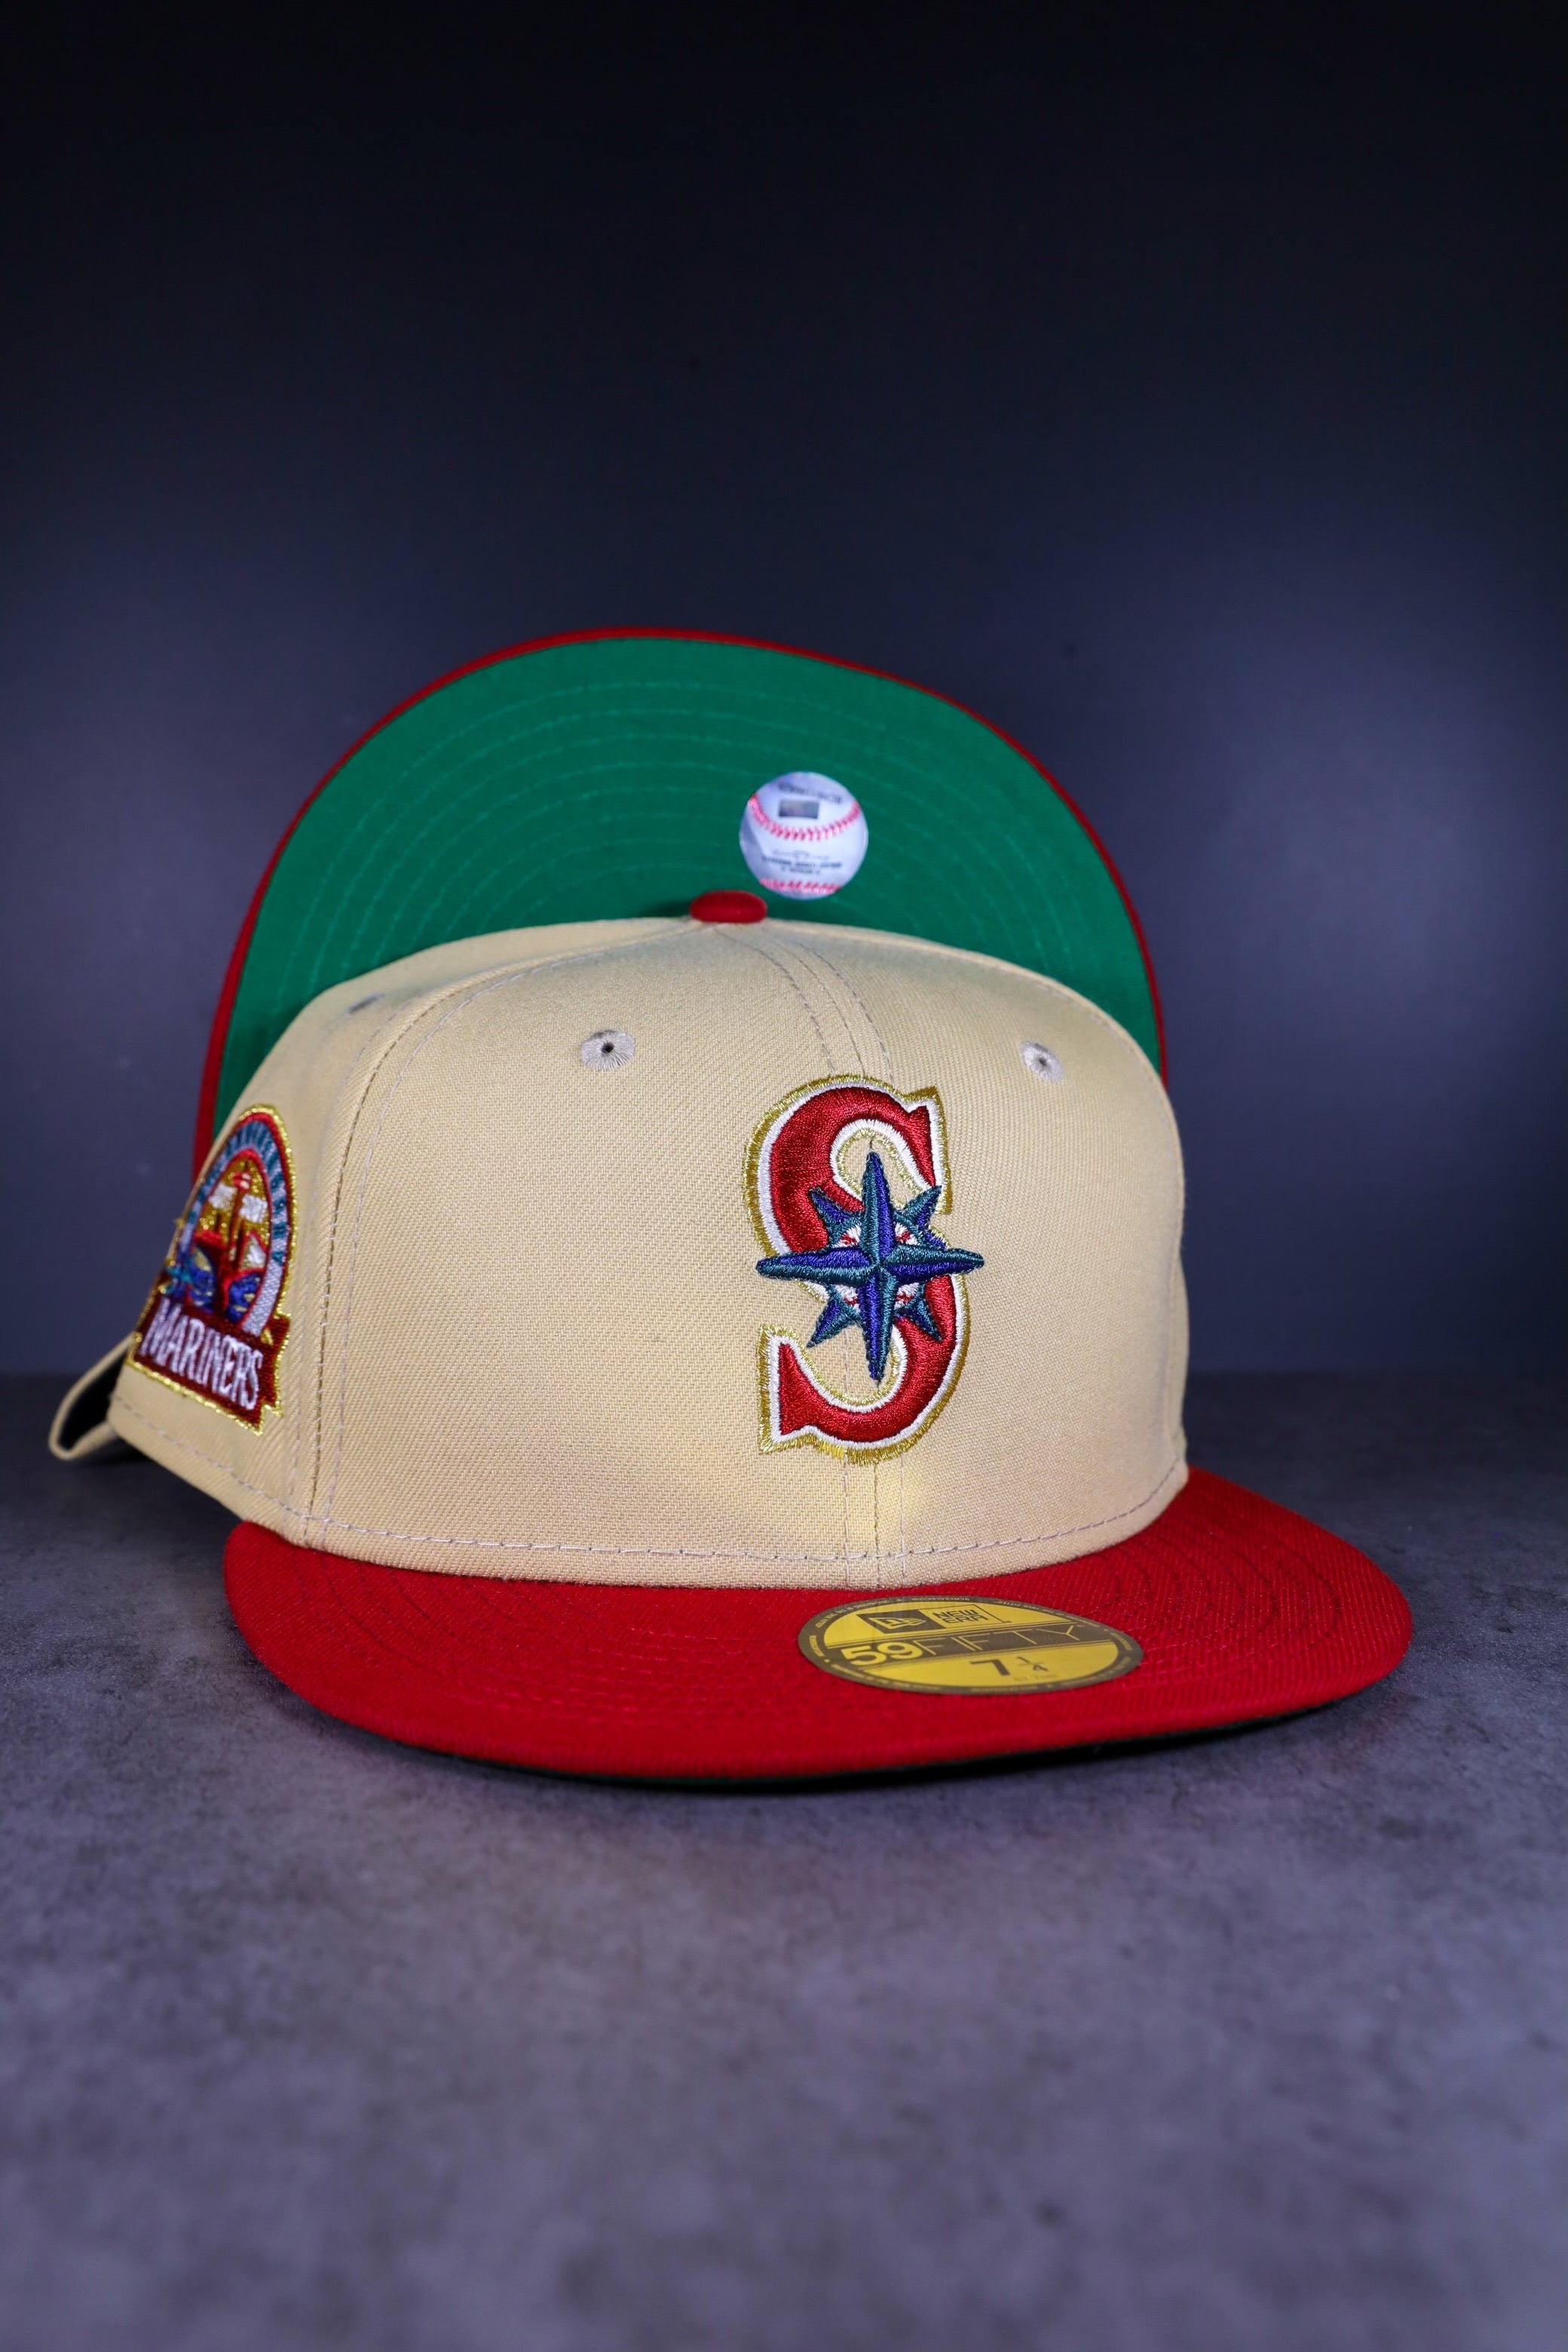 Seattle Mariners “The Chinatown” New Era Vegas Gold/H Red Bill and